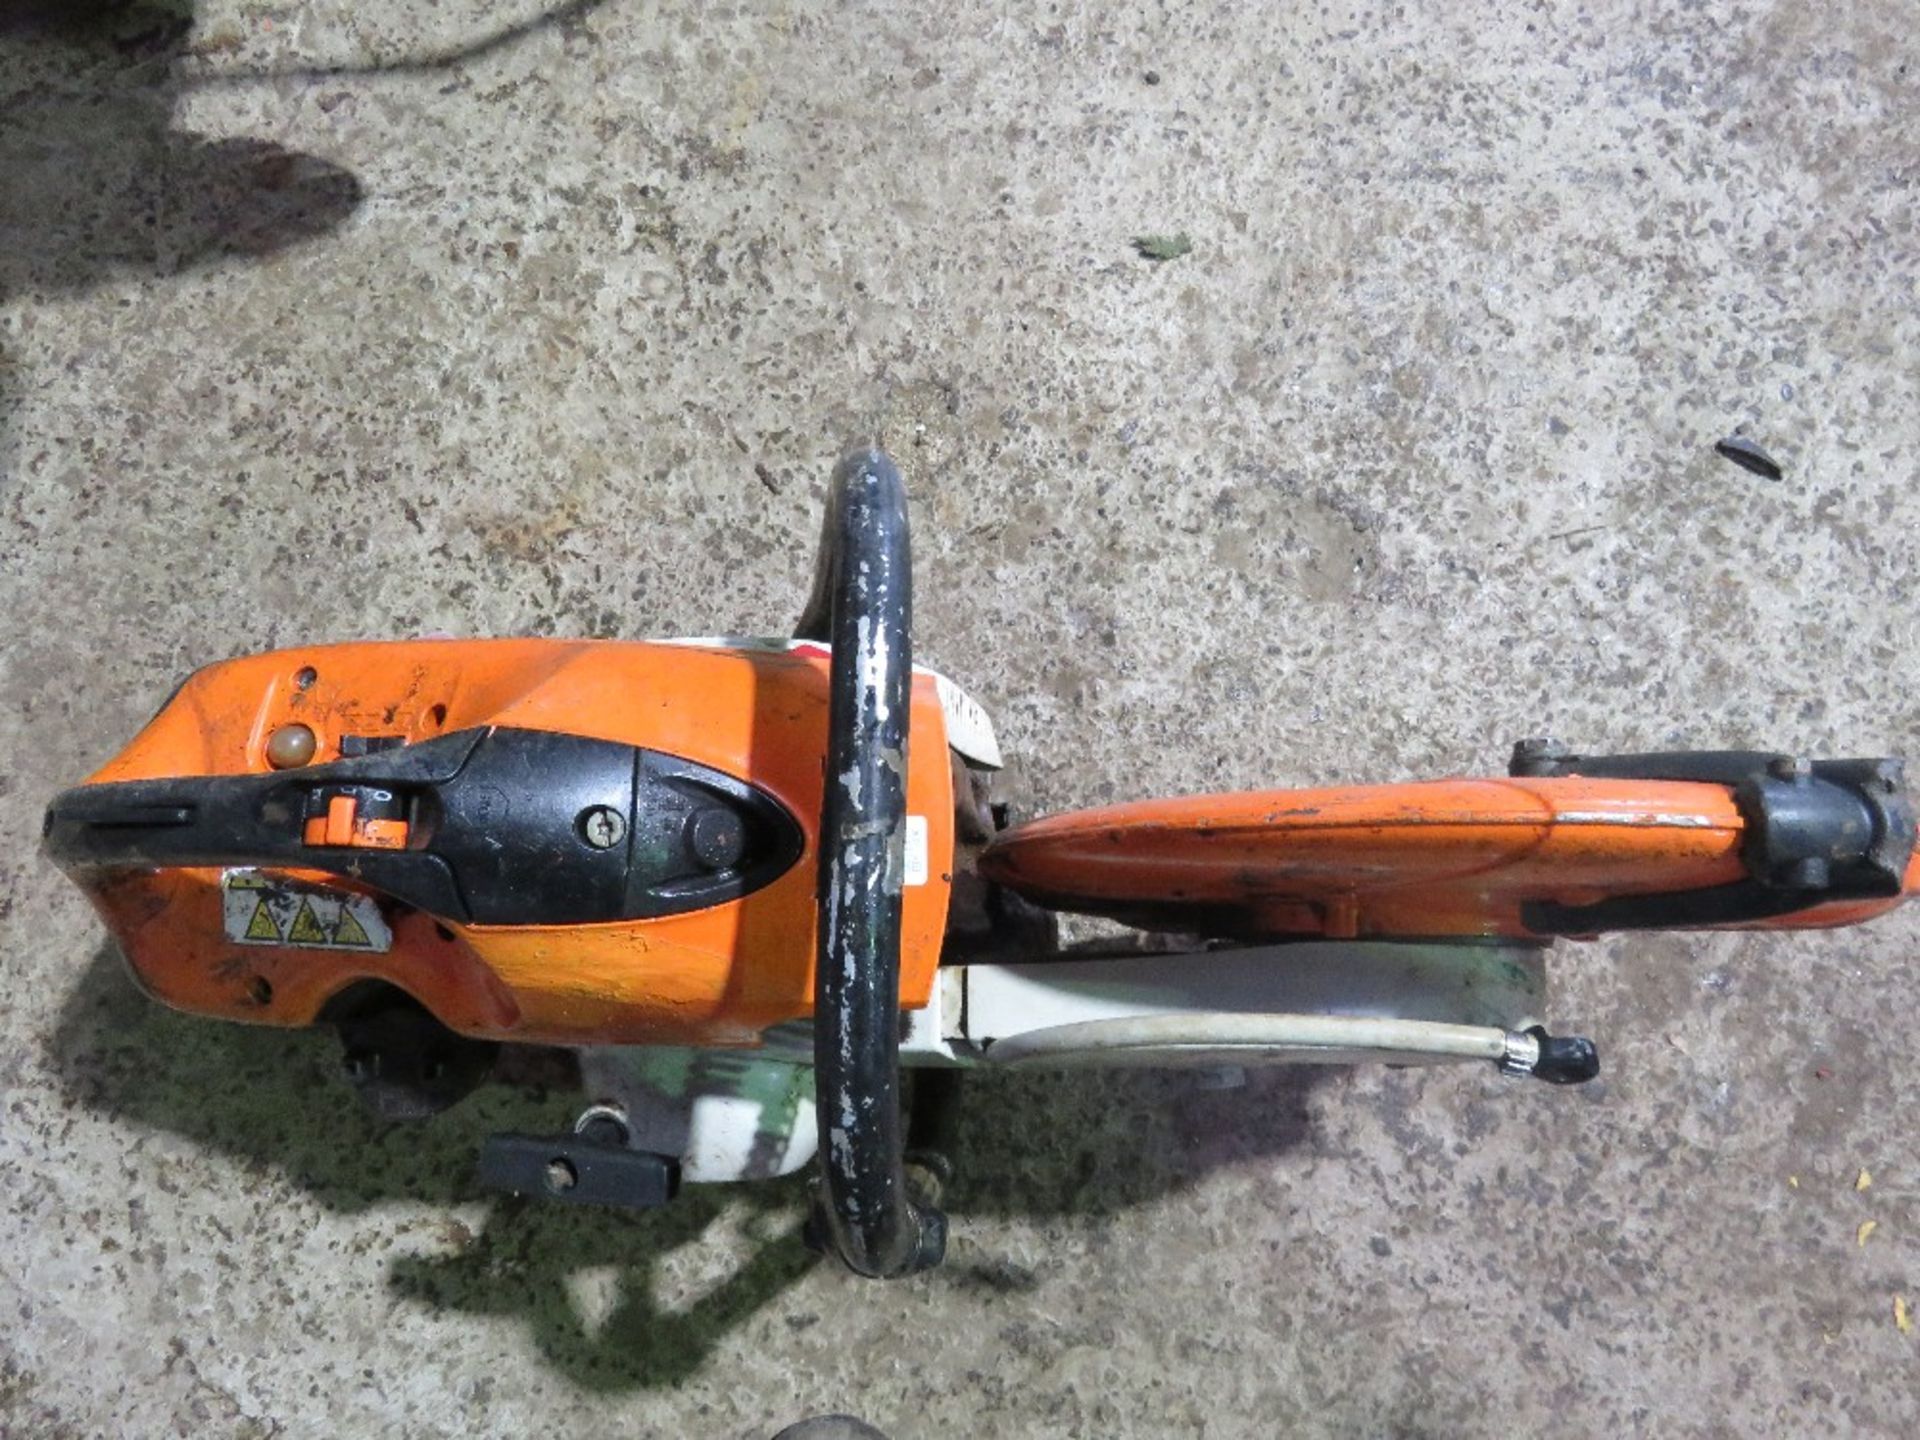 STIHL TS410 PETROL ENGINED CUT OFF SAW. THIS LOT IS SOLD UNDER THE AUCTIONEERS MARGIN SCHEME, THE - Image 4 of 5